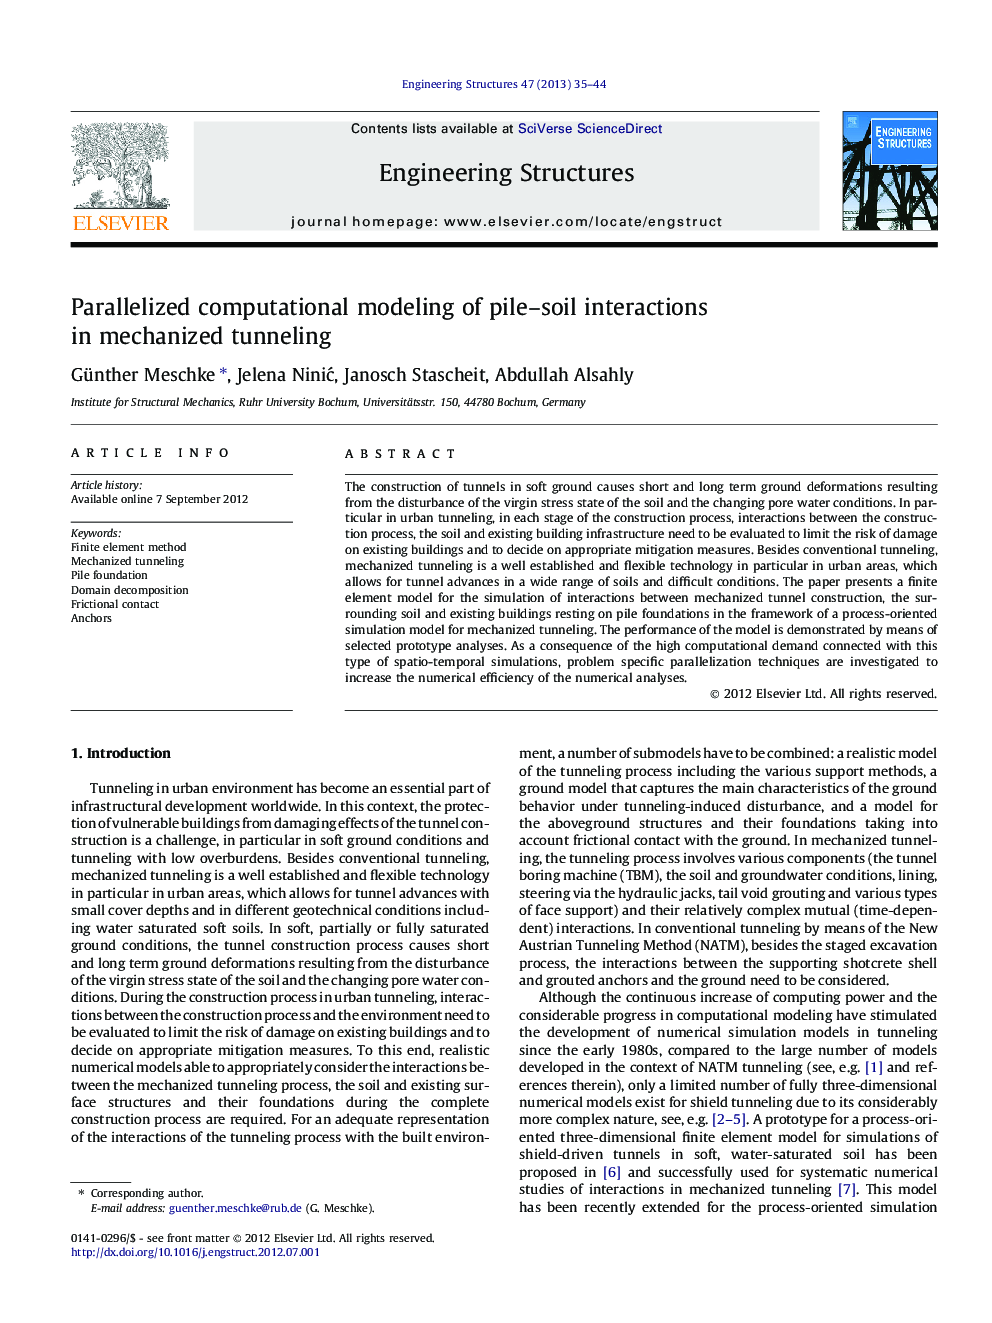 Parallelized computational modeling of pile-soil interactions in mechanized tunneling